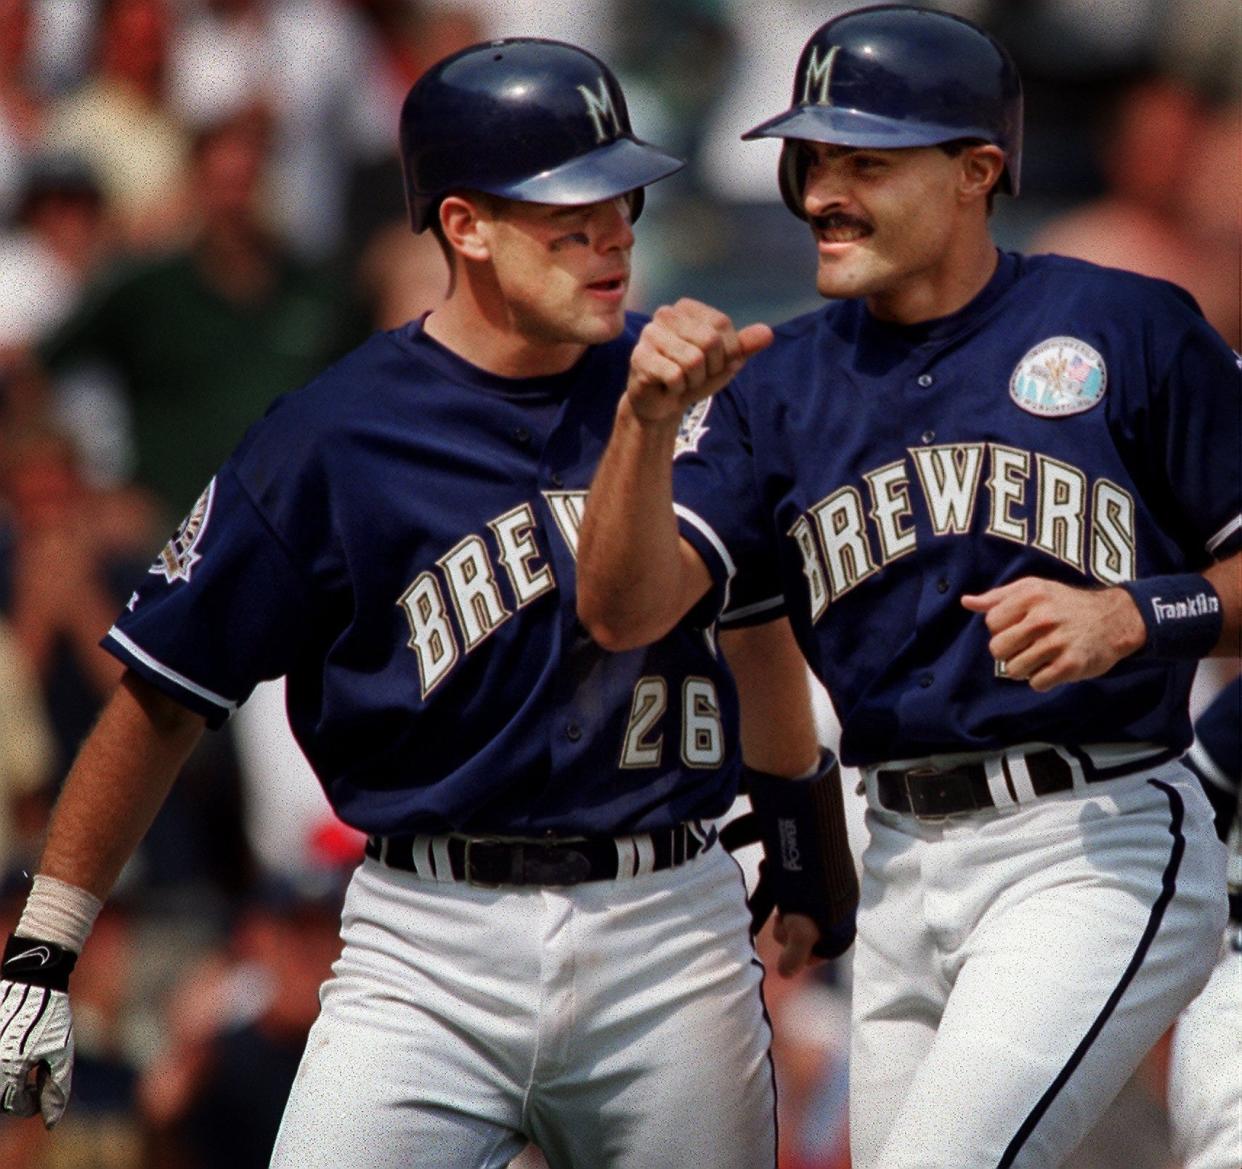 José Valentín (right) reacts to his sixth-inning grand slam home run with teammate Jeff Cirillo on Aug. 25, 1999.